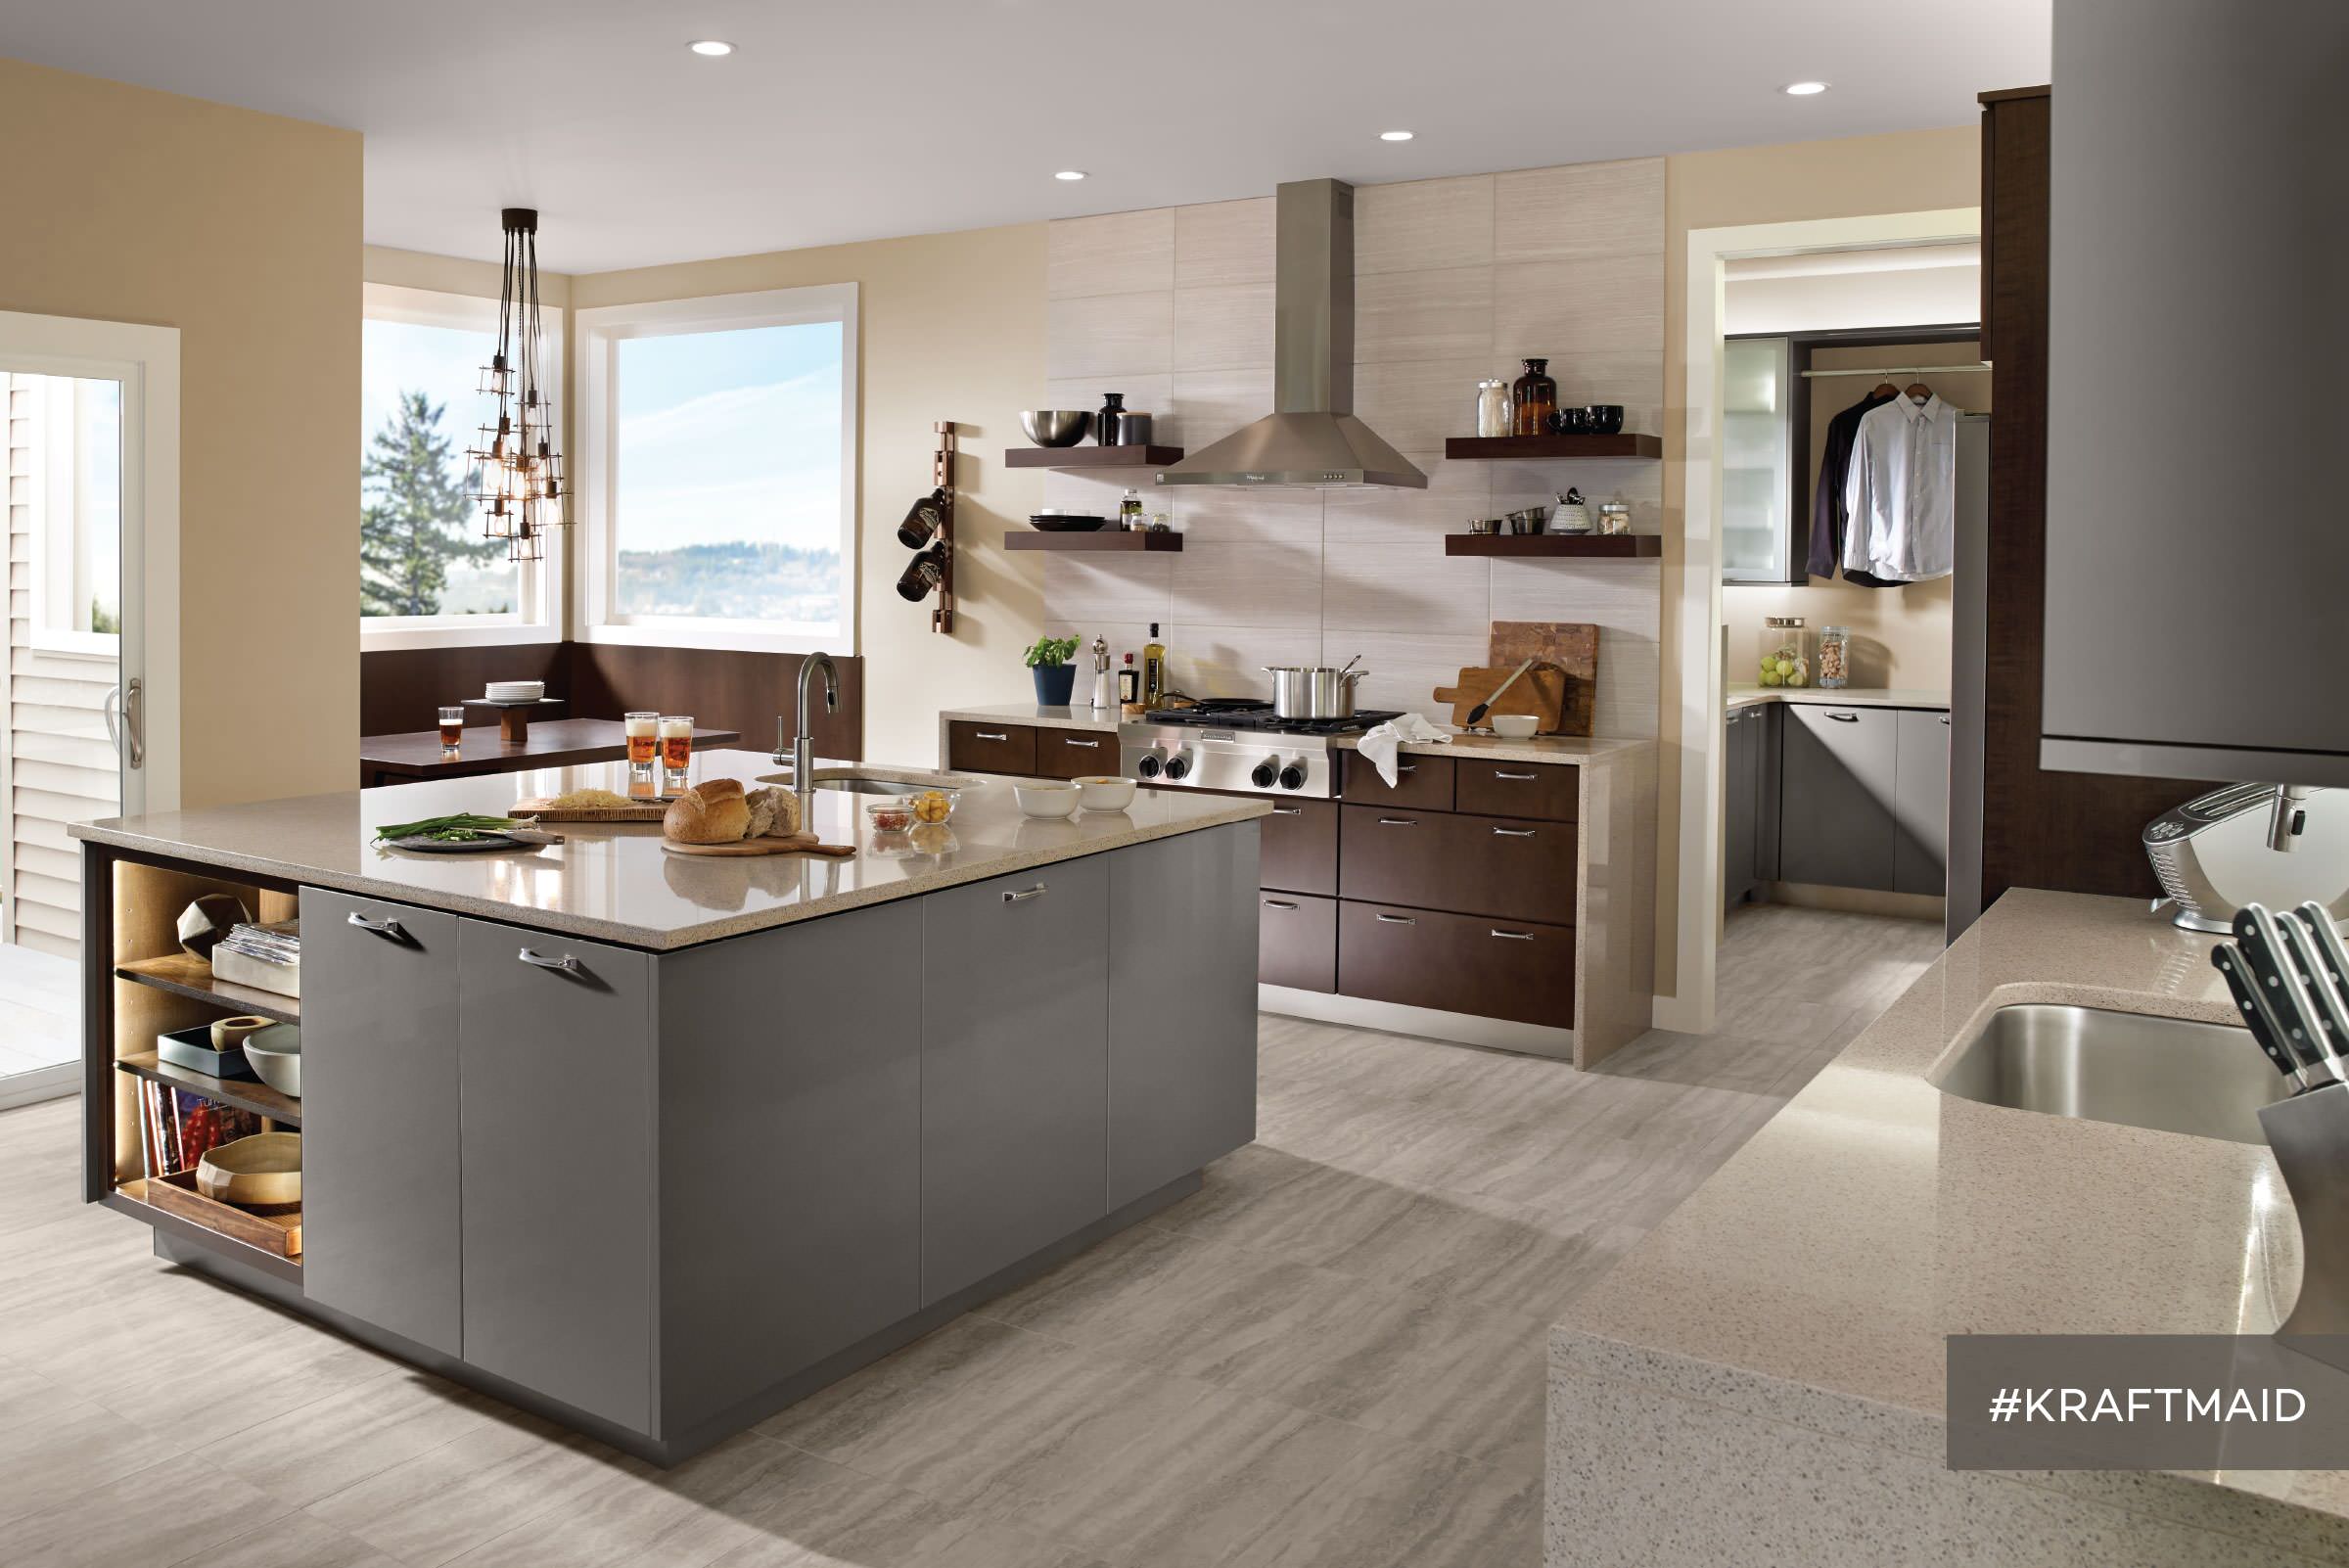 Kraftmaid Modern Gray And Wood Kitchen Cabinetry Contemporary Kitchen Detroit By Kraftmaid Houzz